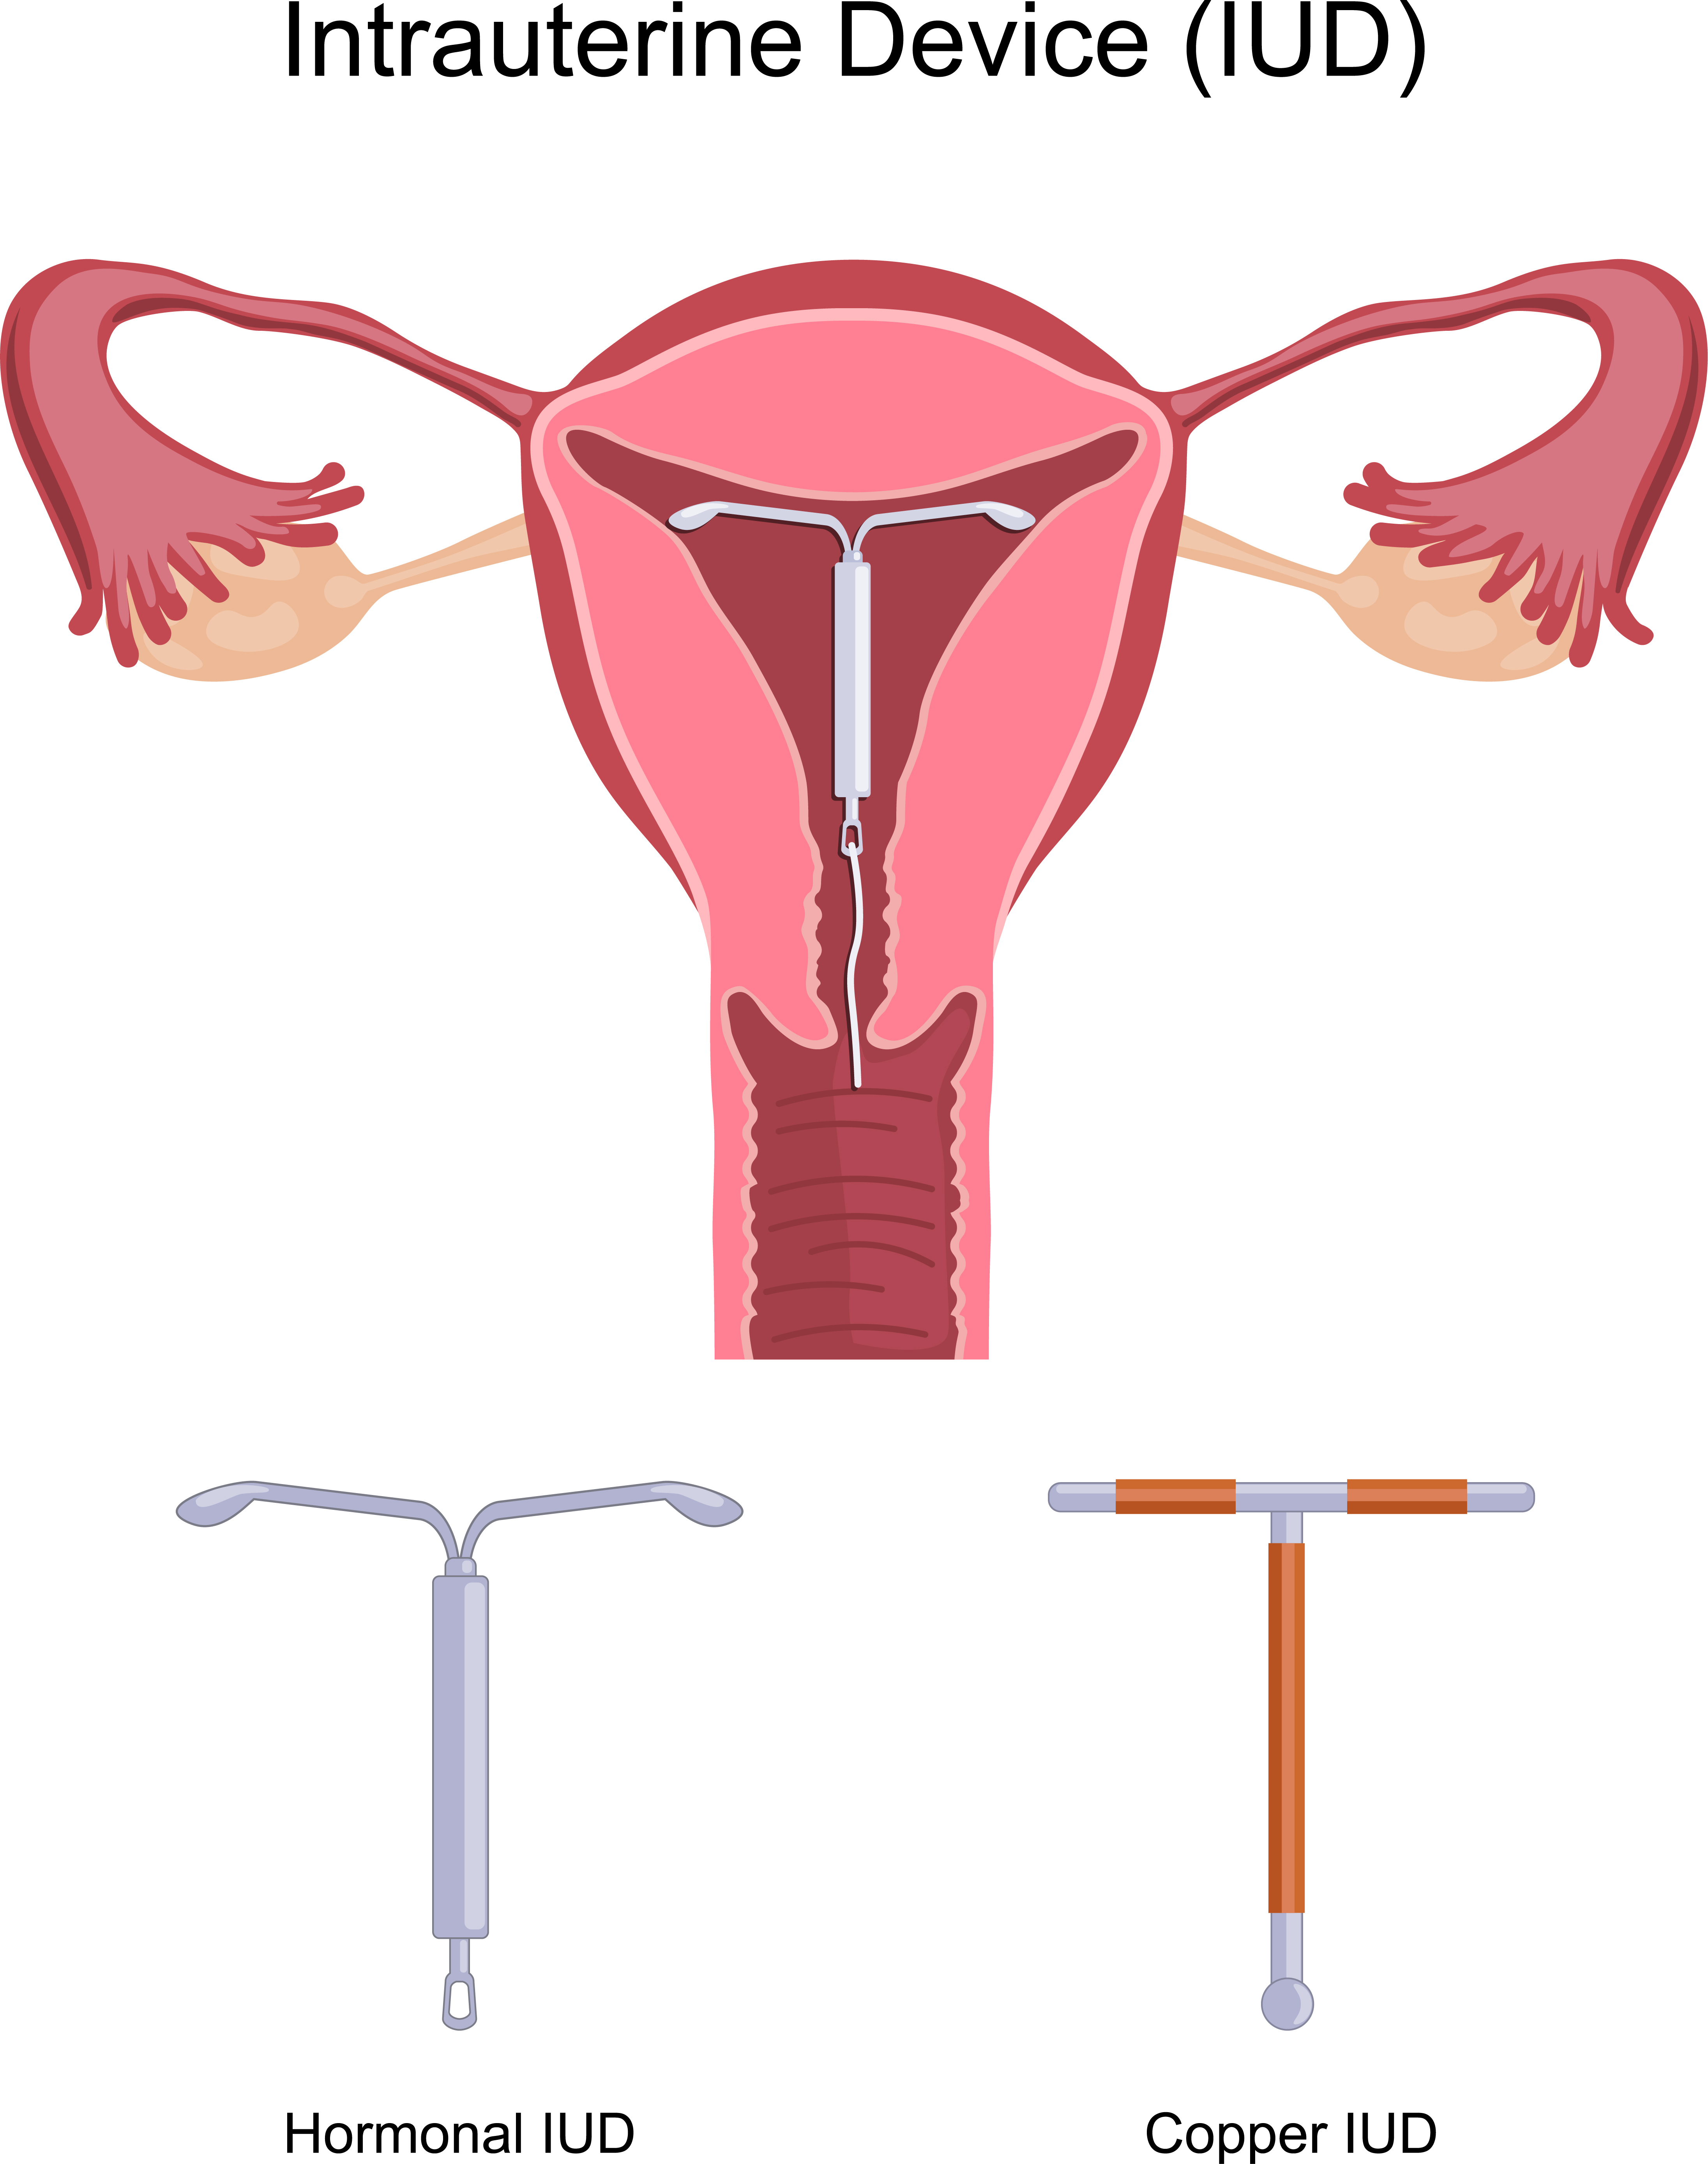 IUD in the uterus, with strings coming out of the cervix.